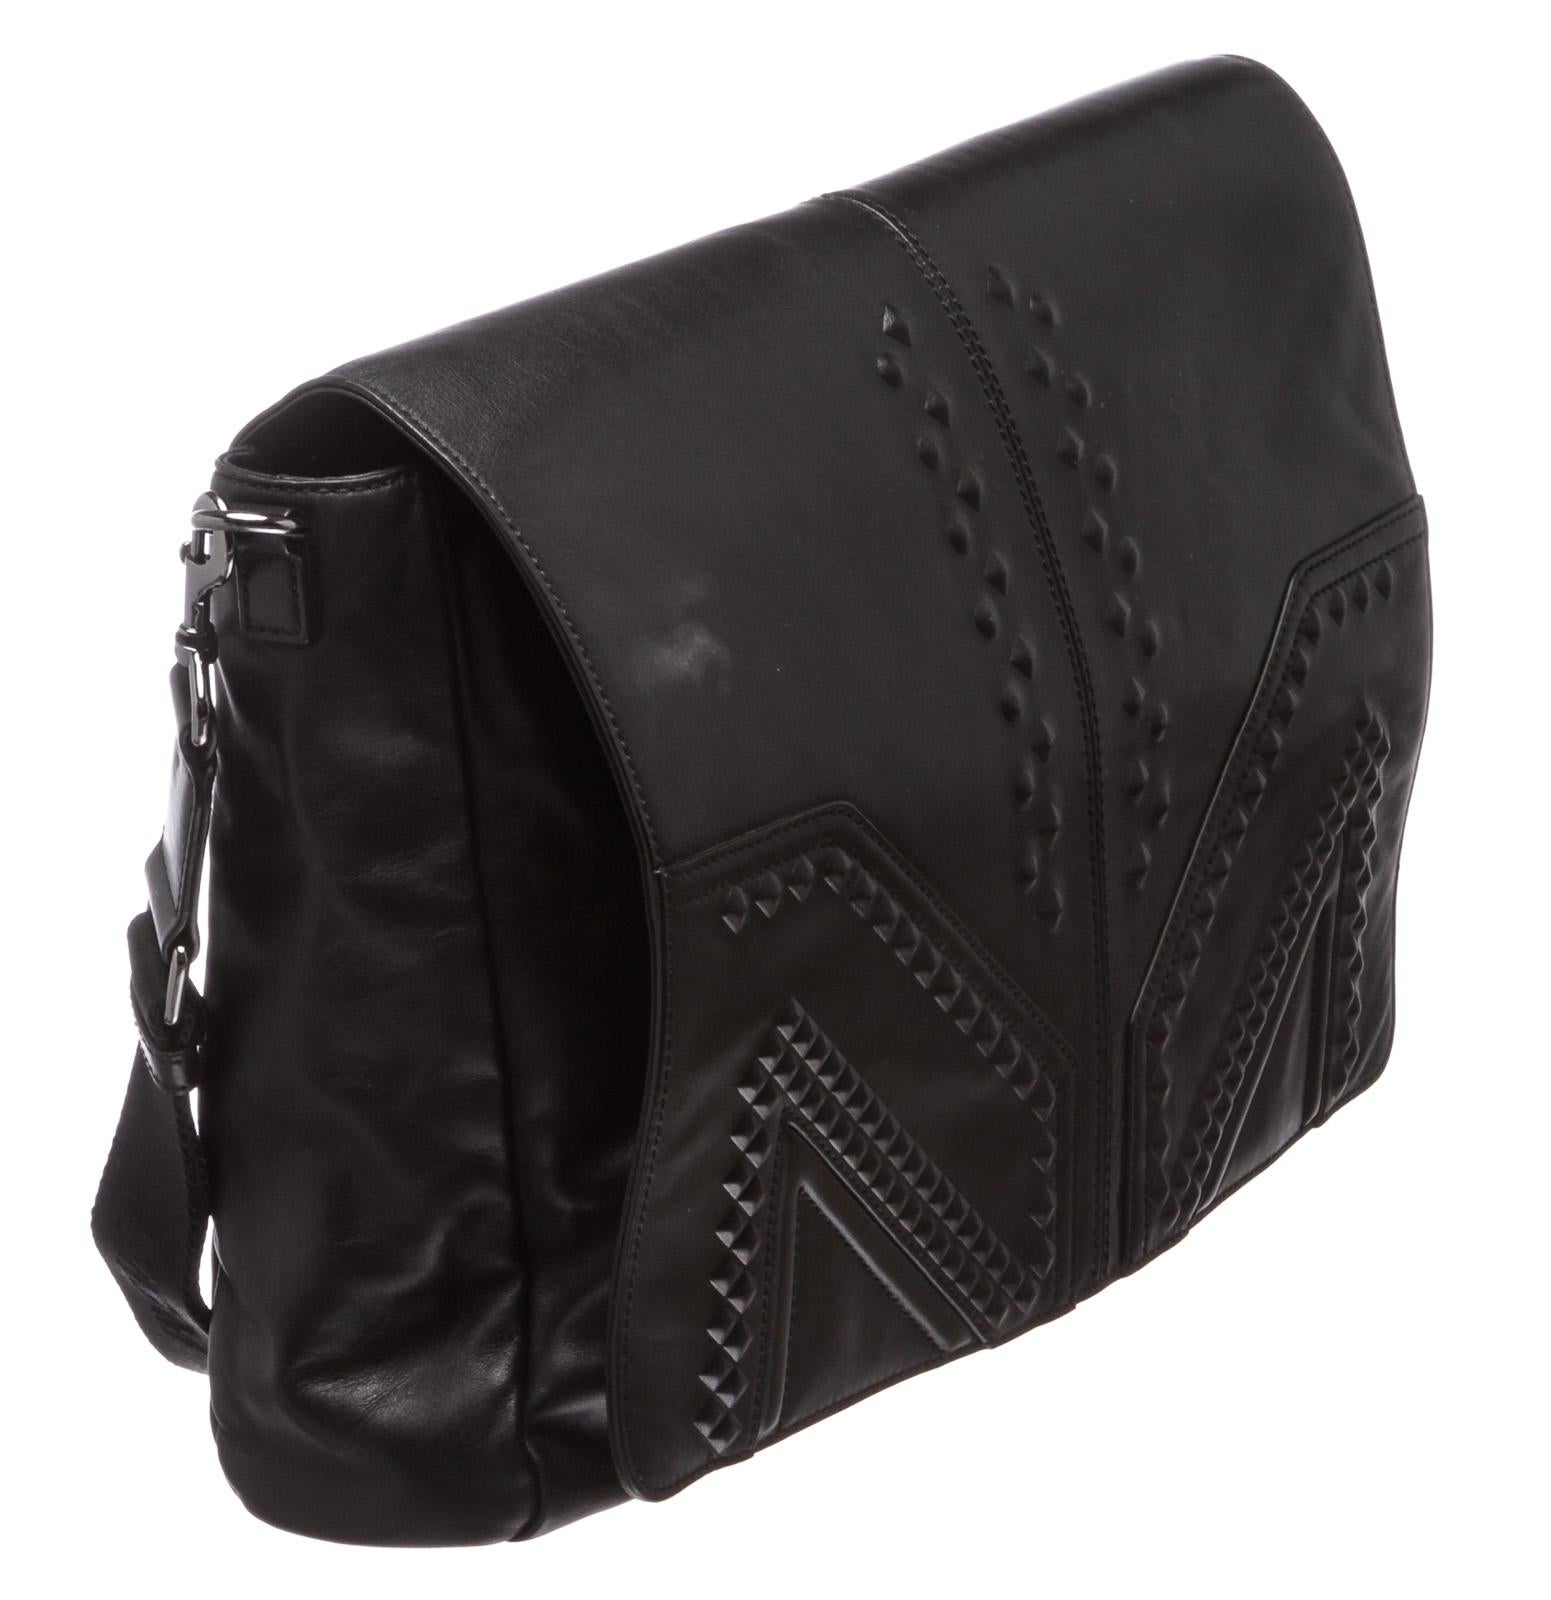 Black leather MCM M. Moment messenger bag contains tonal stitching, debossed stud details at front face and detachable shoulder strap. Interior is satin lined and contains two compartments, one zipper two zipper pockets, and two side slip pockets.